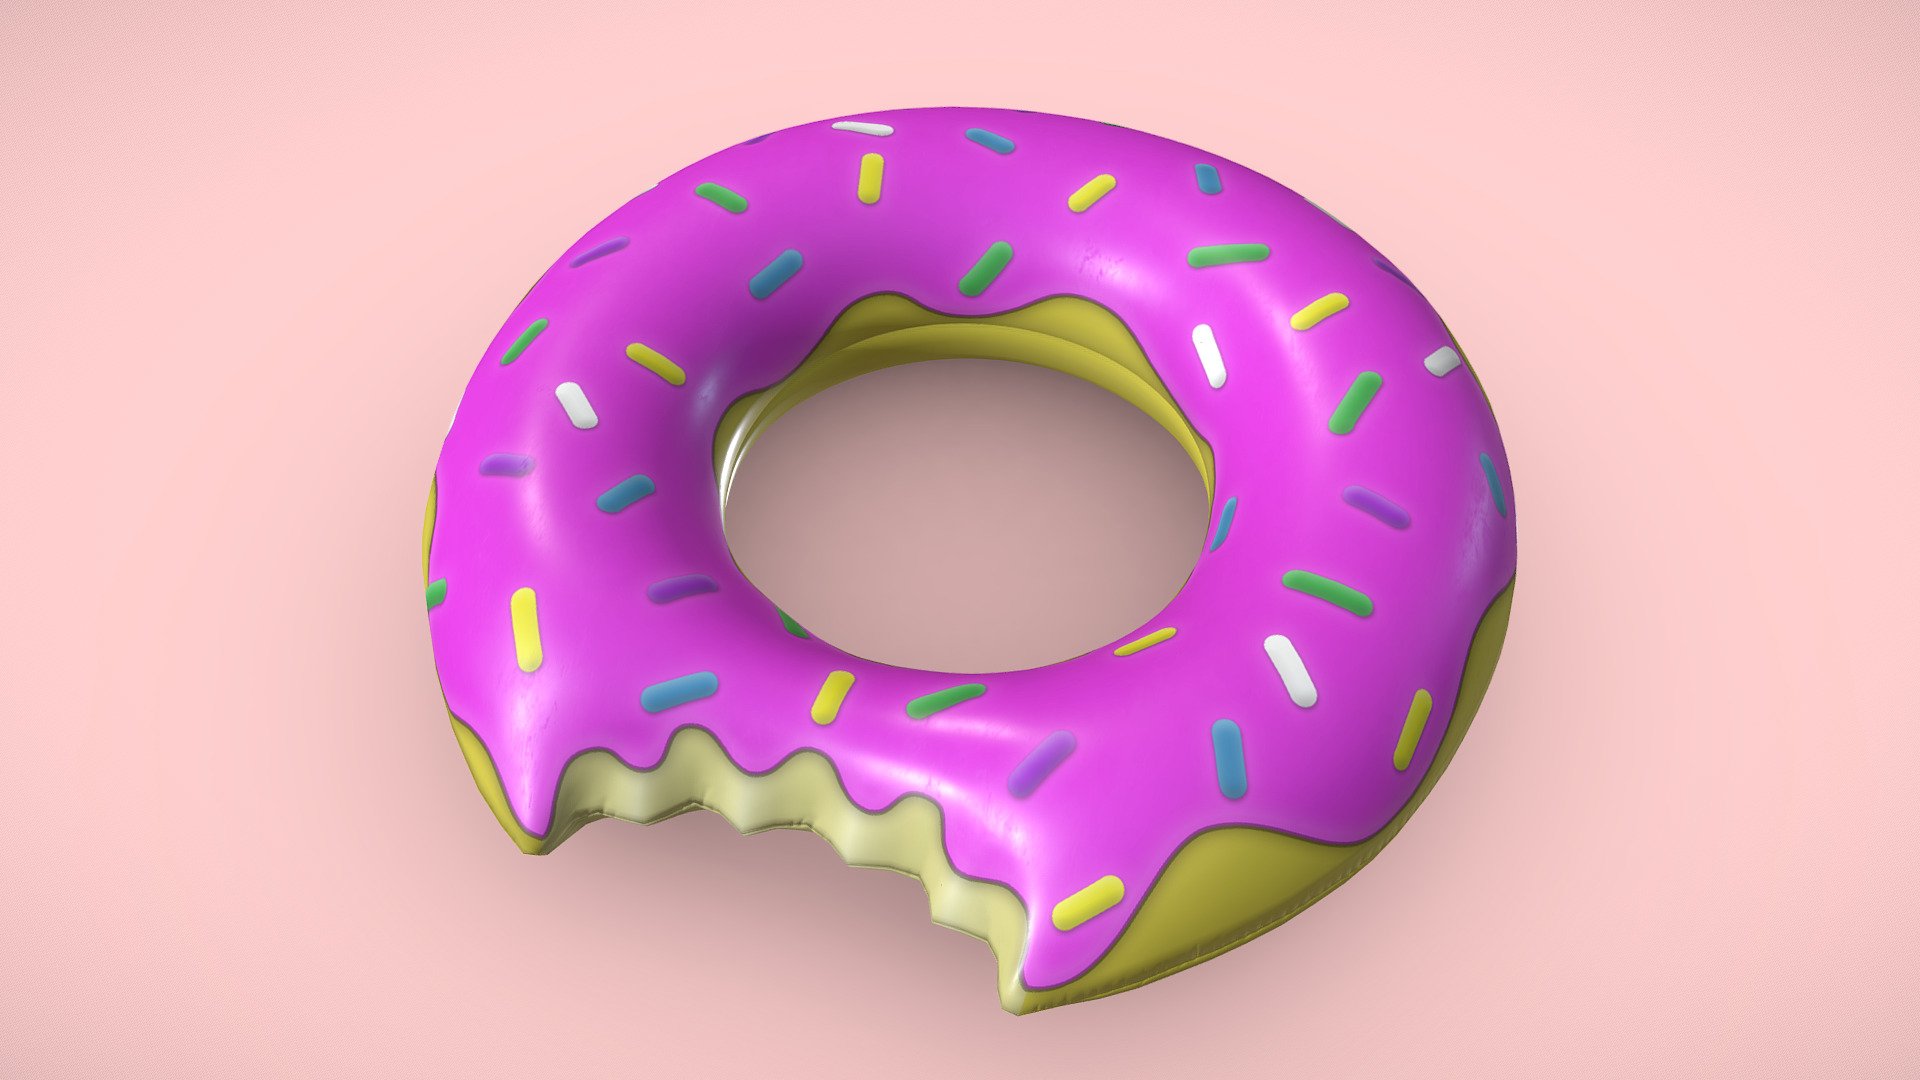 Inflatable Donut shaped pool toy. Ring diameter is 76 cm (30